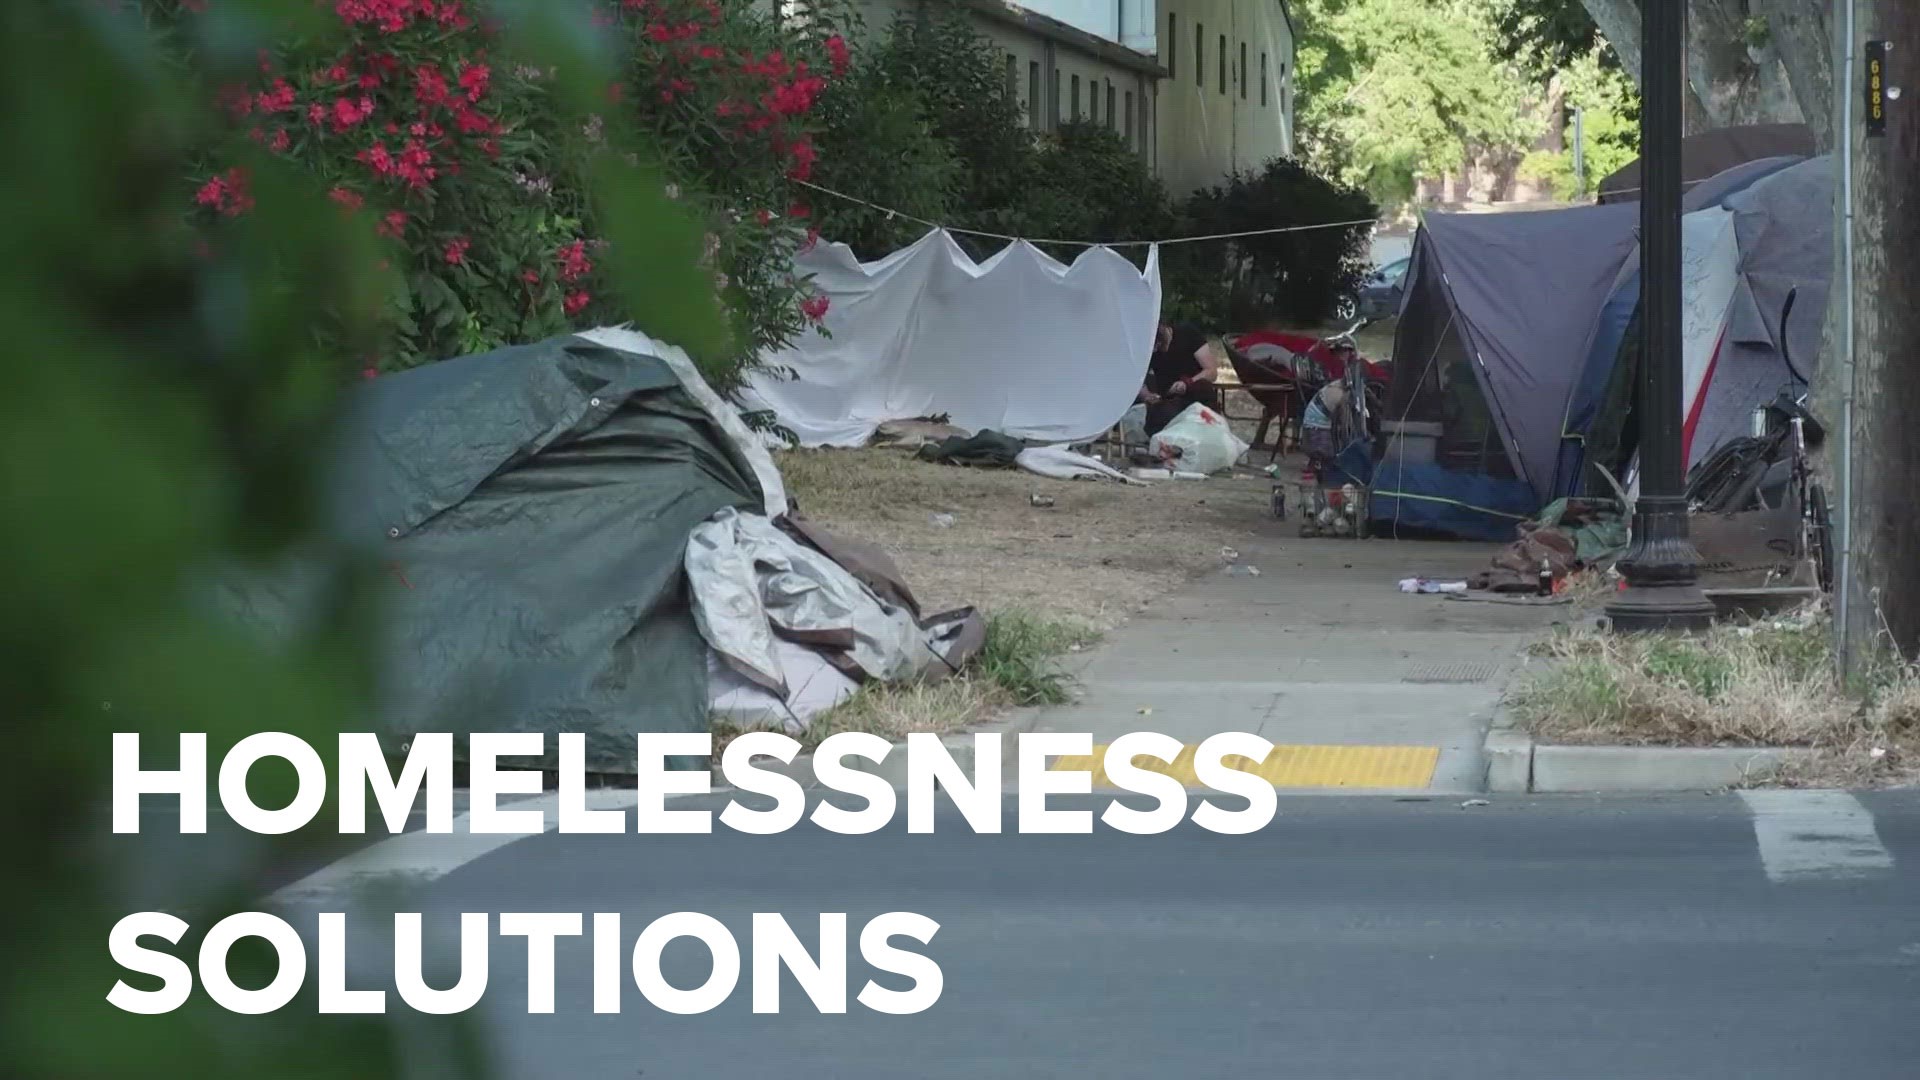 California Homeless Crisis: Potential solution to crisis explained